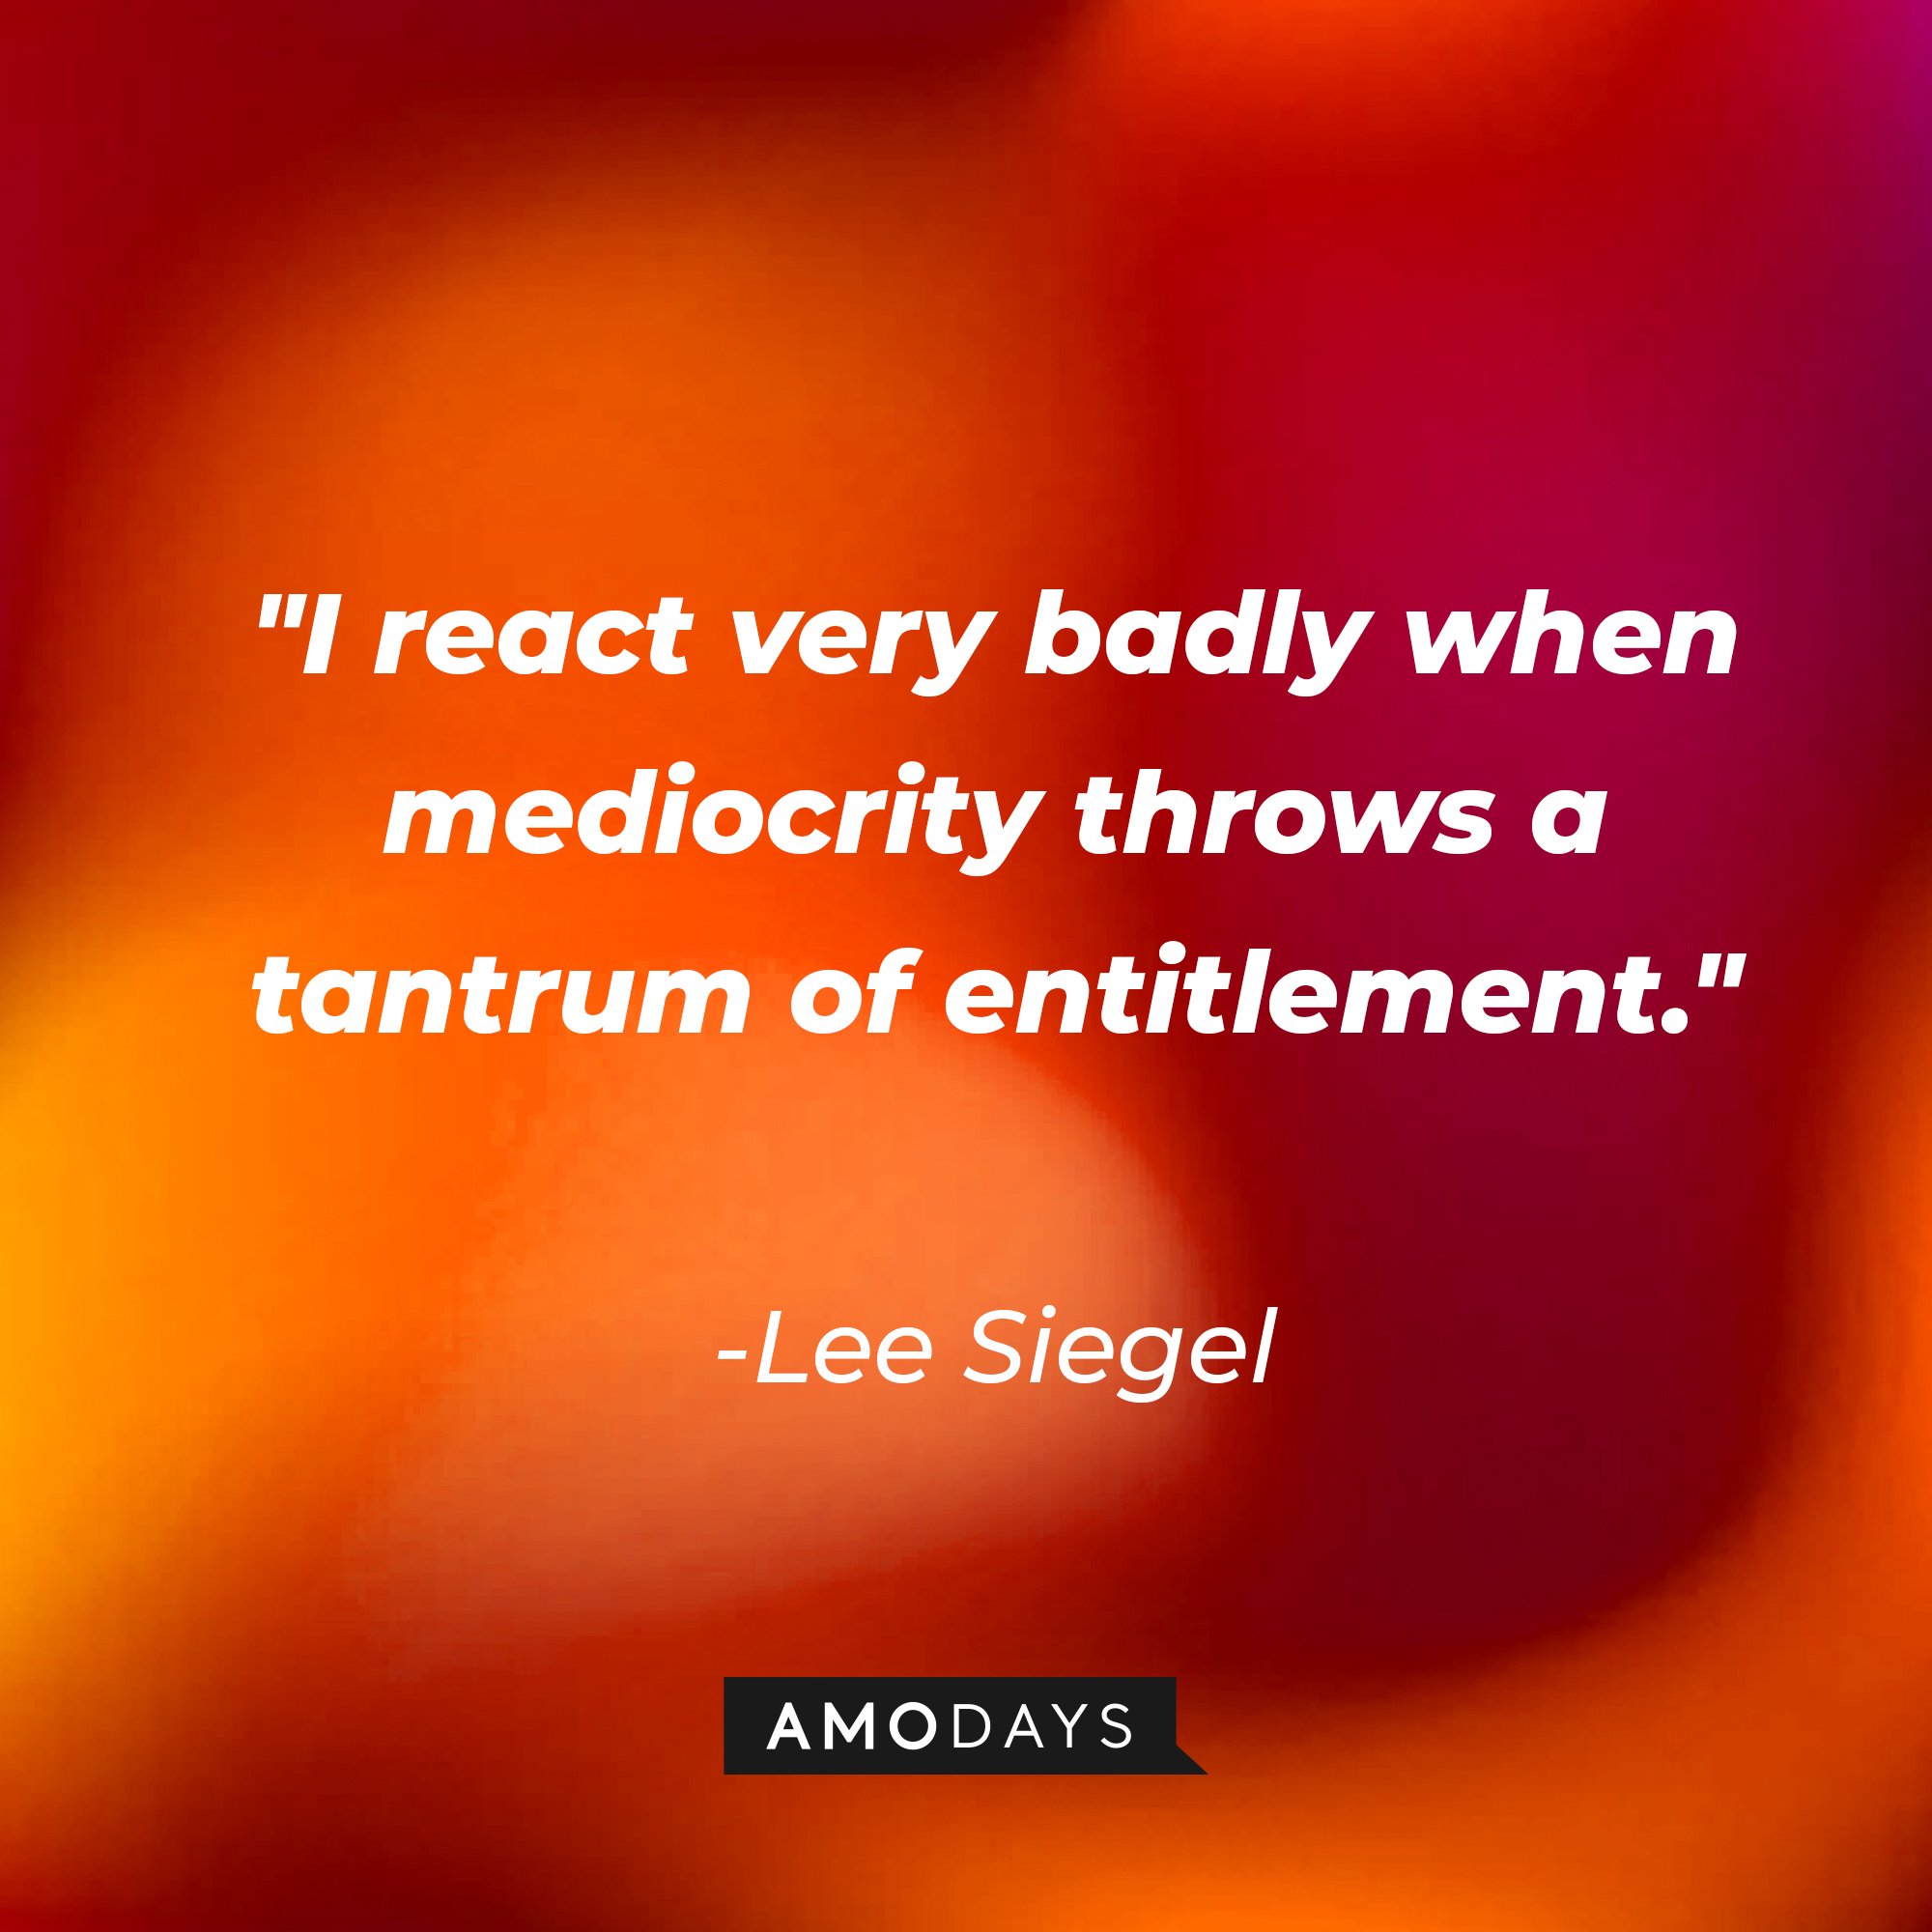 Lee Siegel’s quote: "I react very badly when mediocrity throws a tantrum of entitlement." | Image: AmoDays